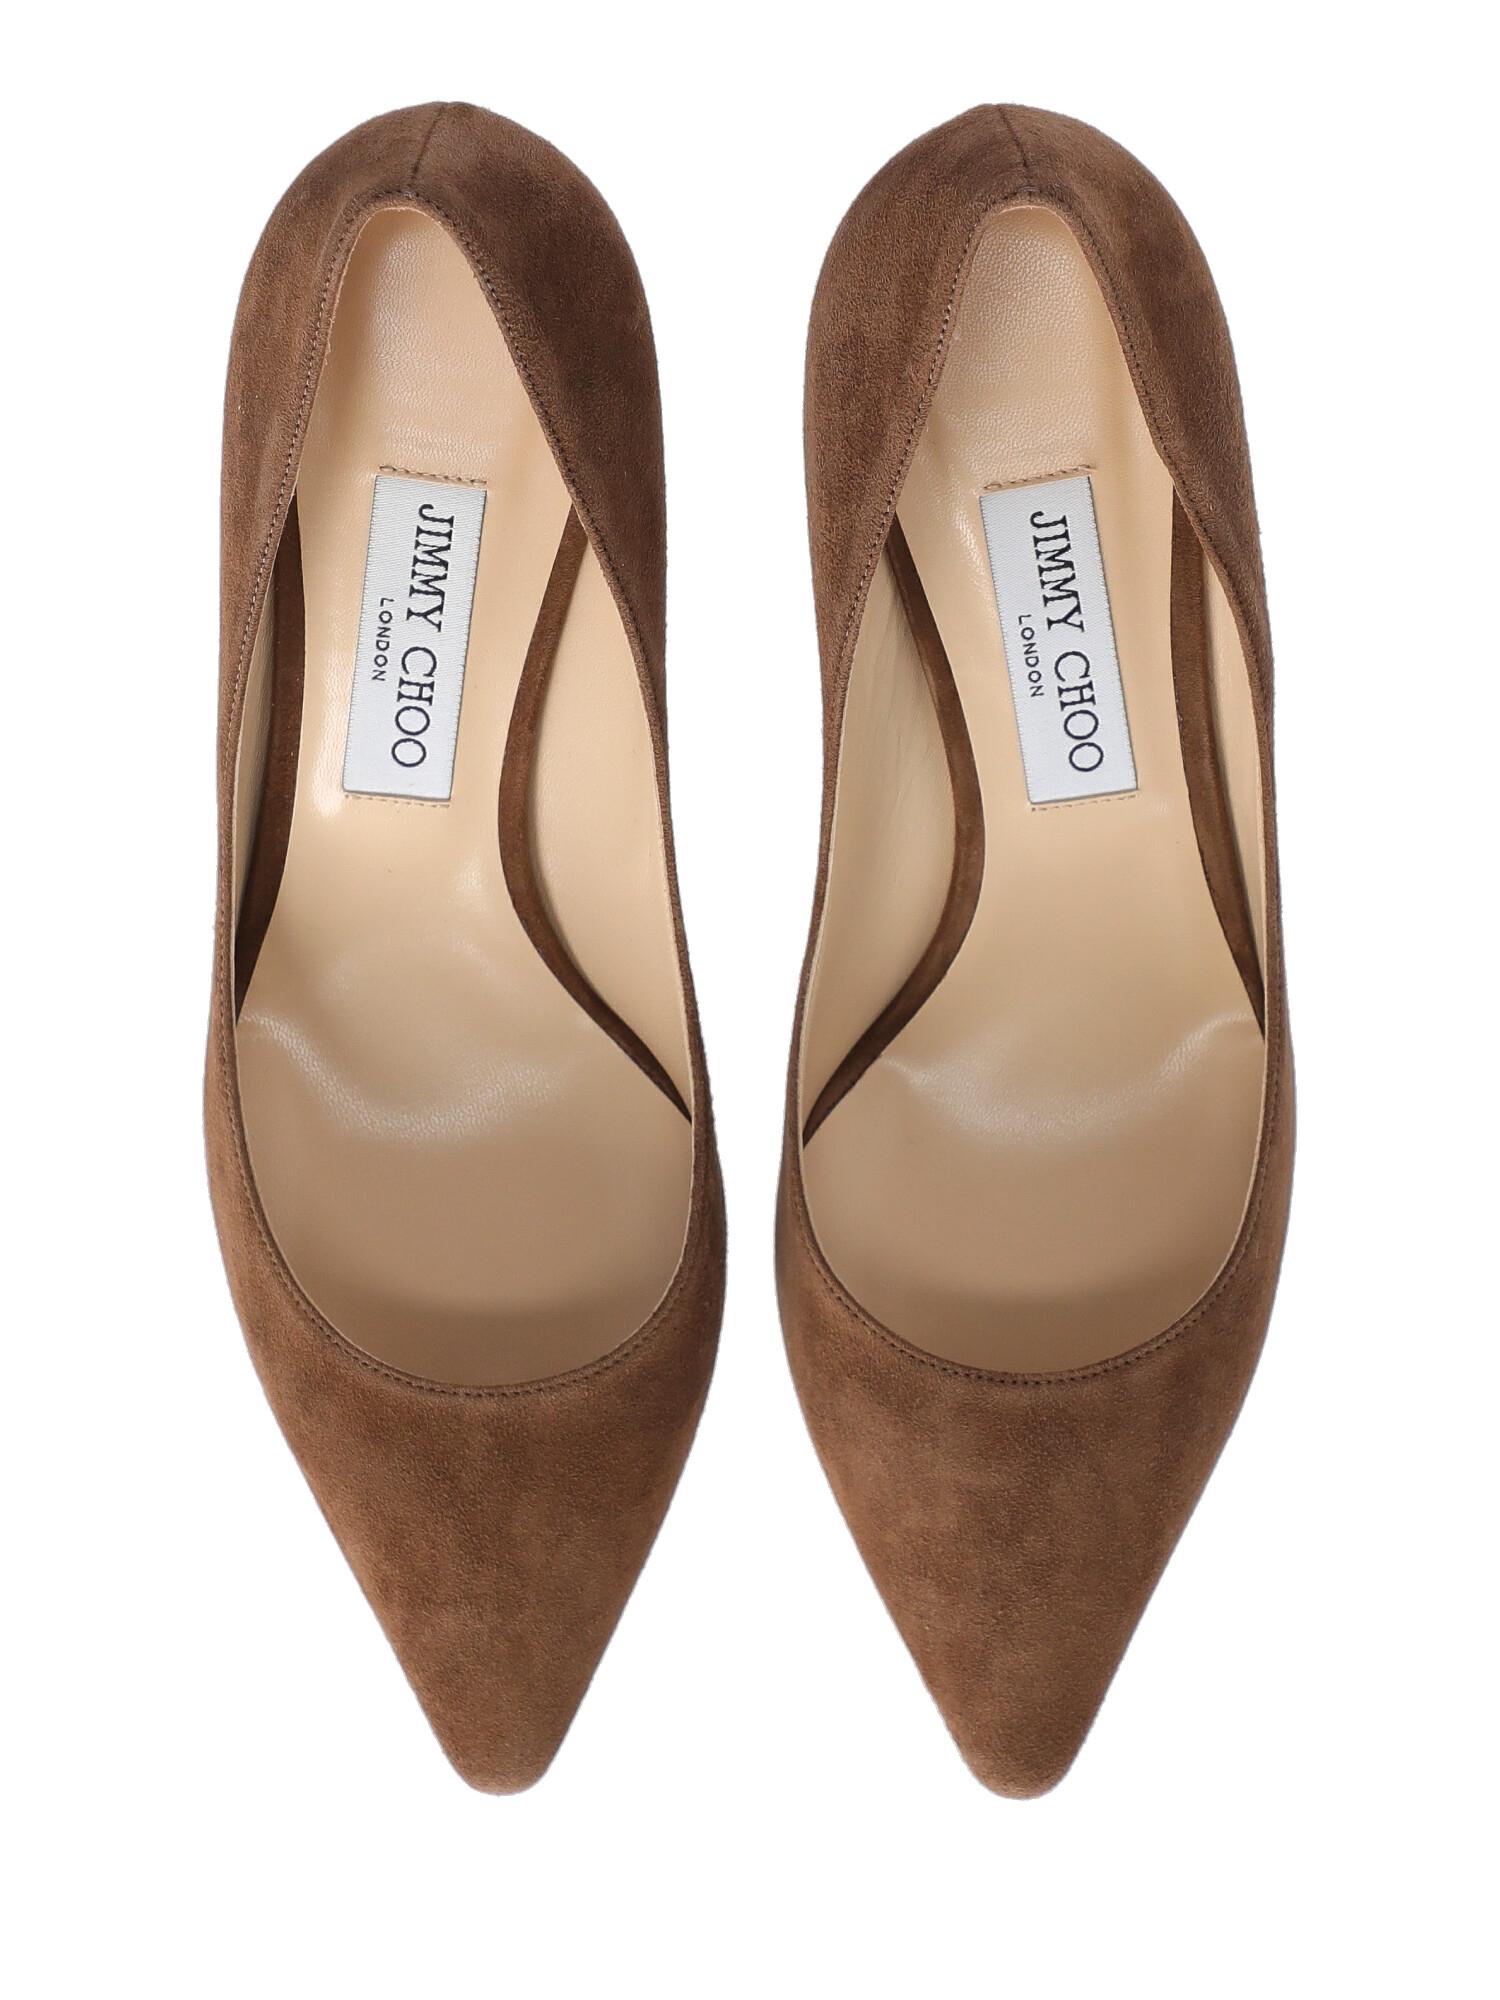 Jimmy Choo Woman Pumps Brown Leather IT 41 For Sale 2